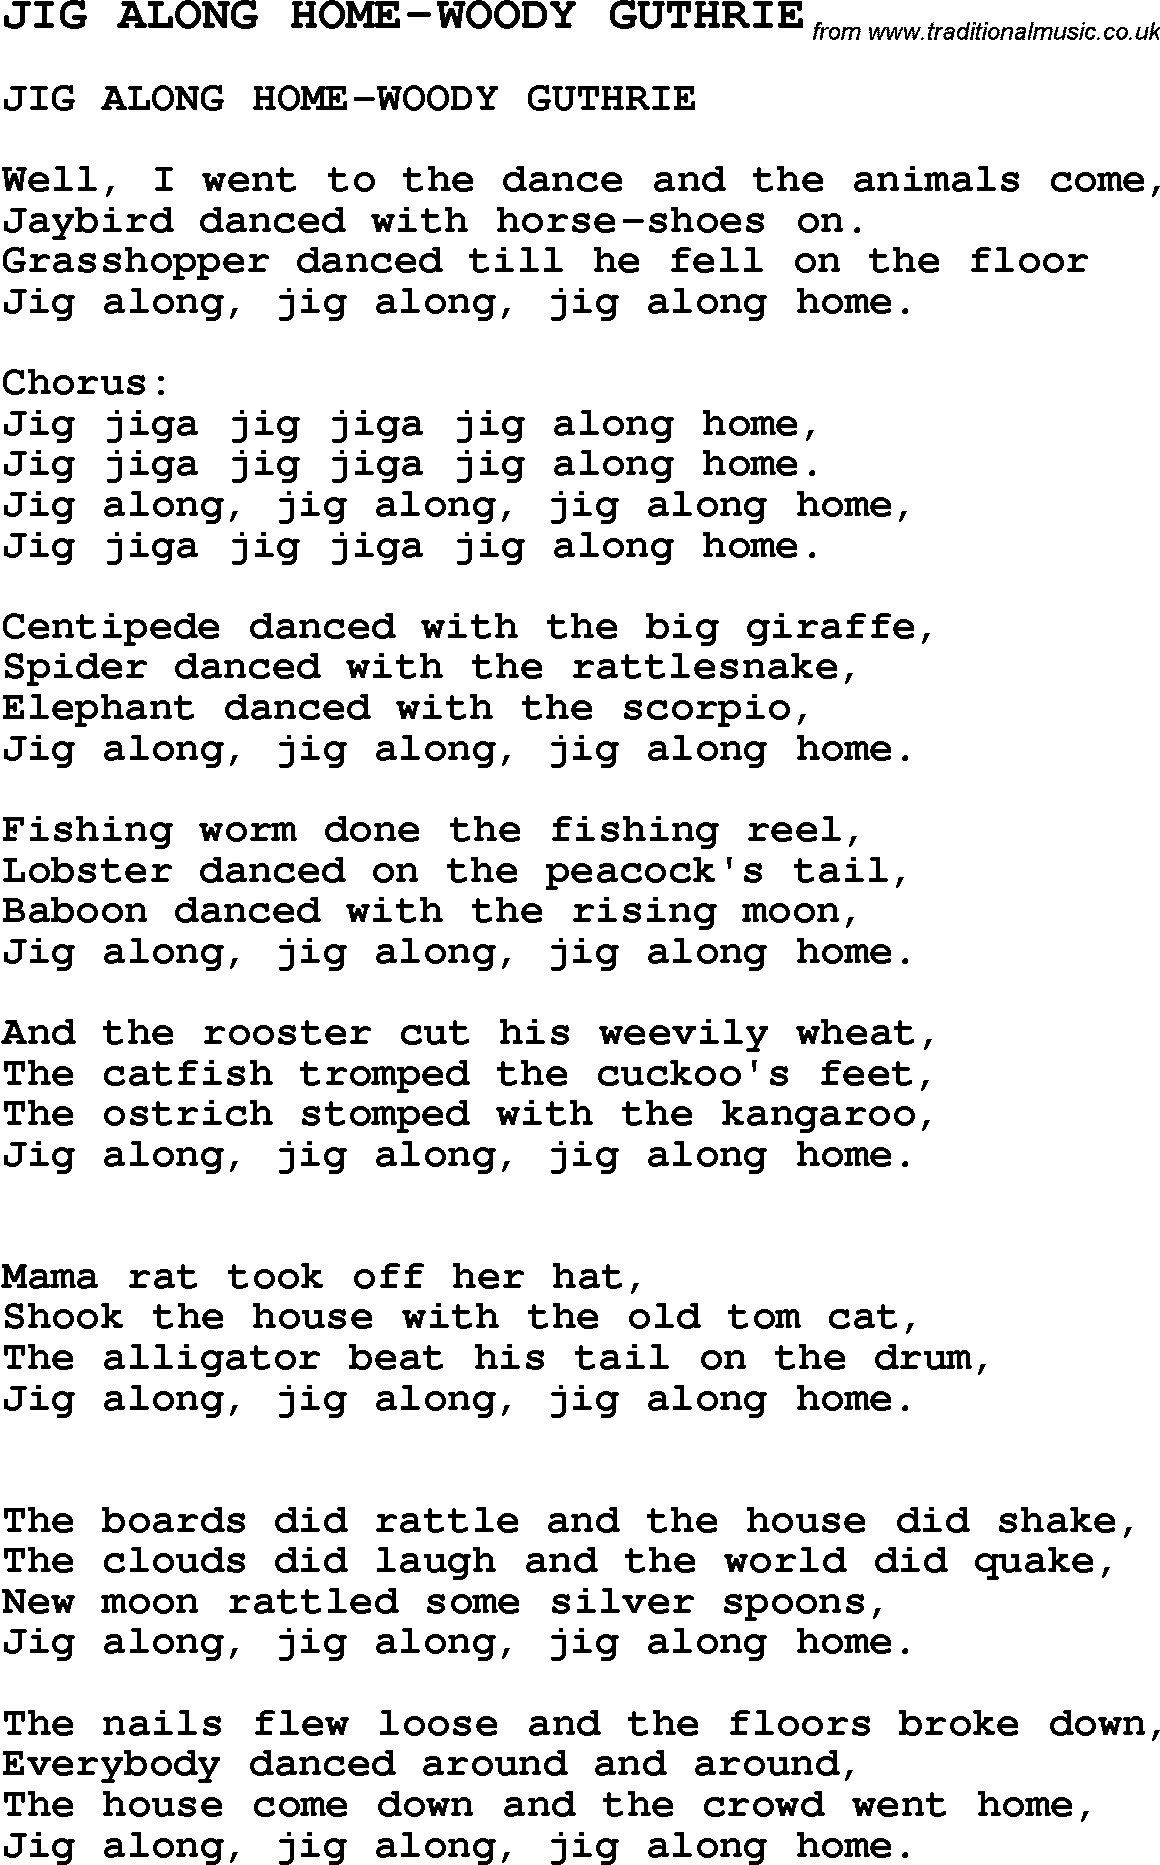 Skiffle Song Lyrics for Jig Along Home-Woody Guthrie.